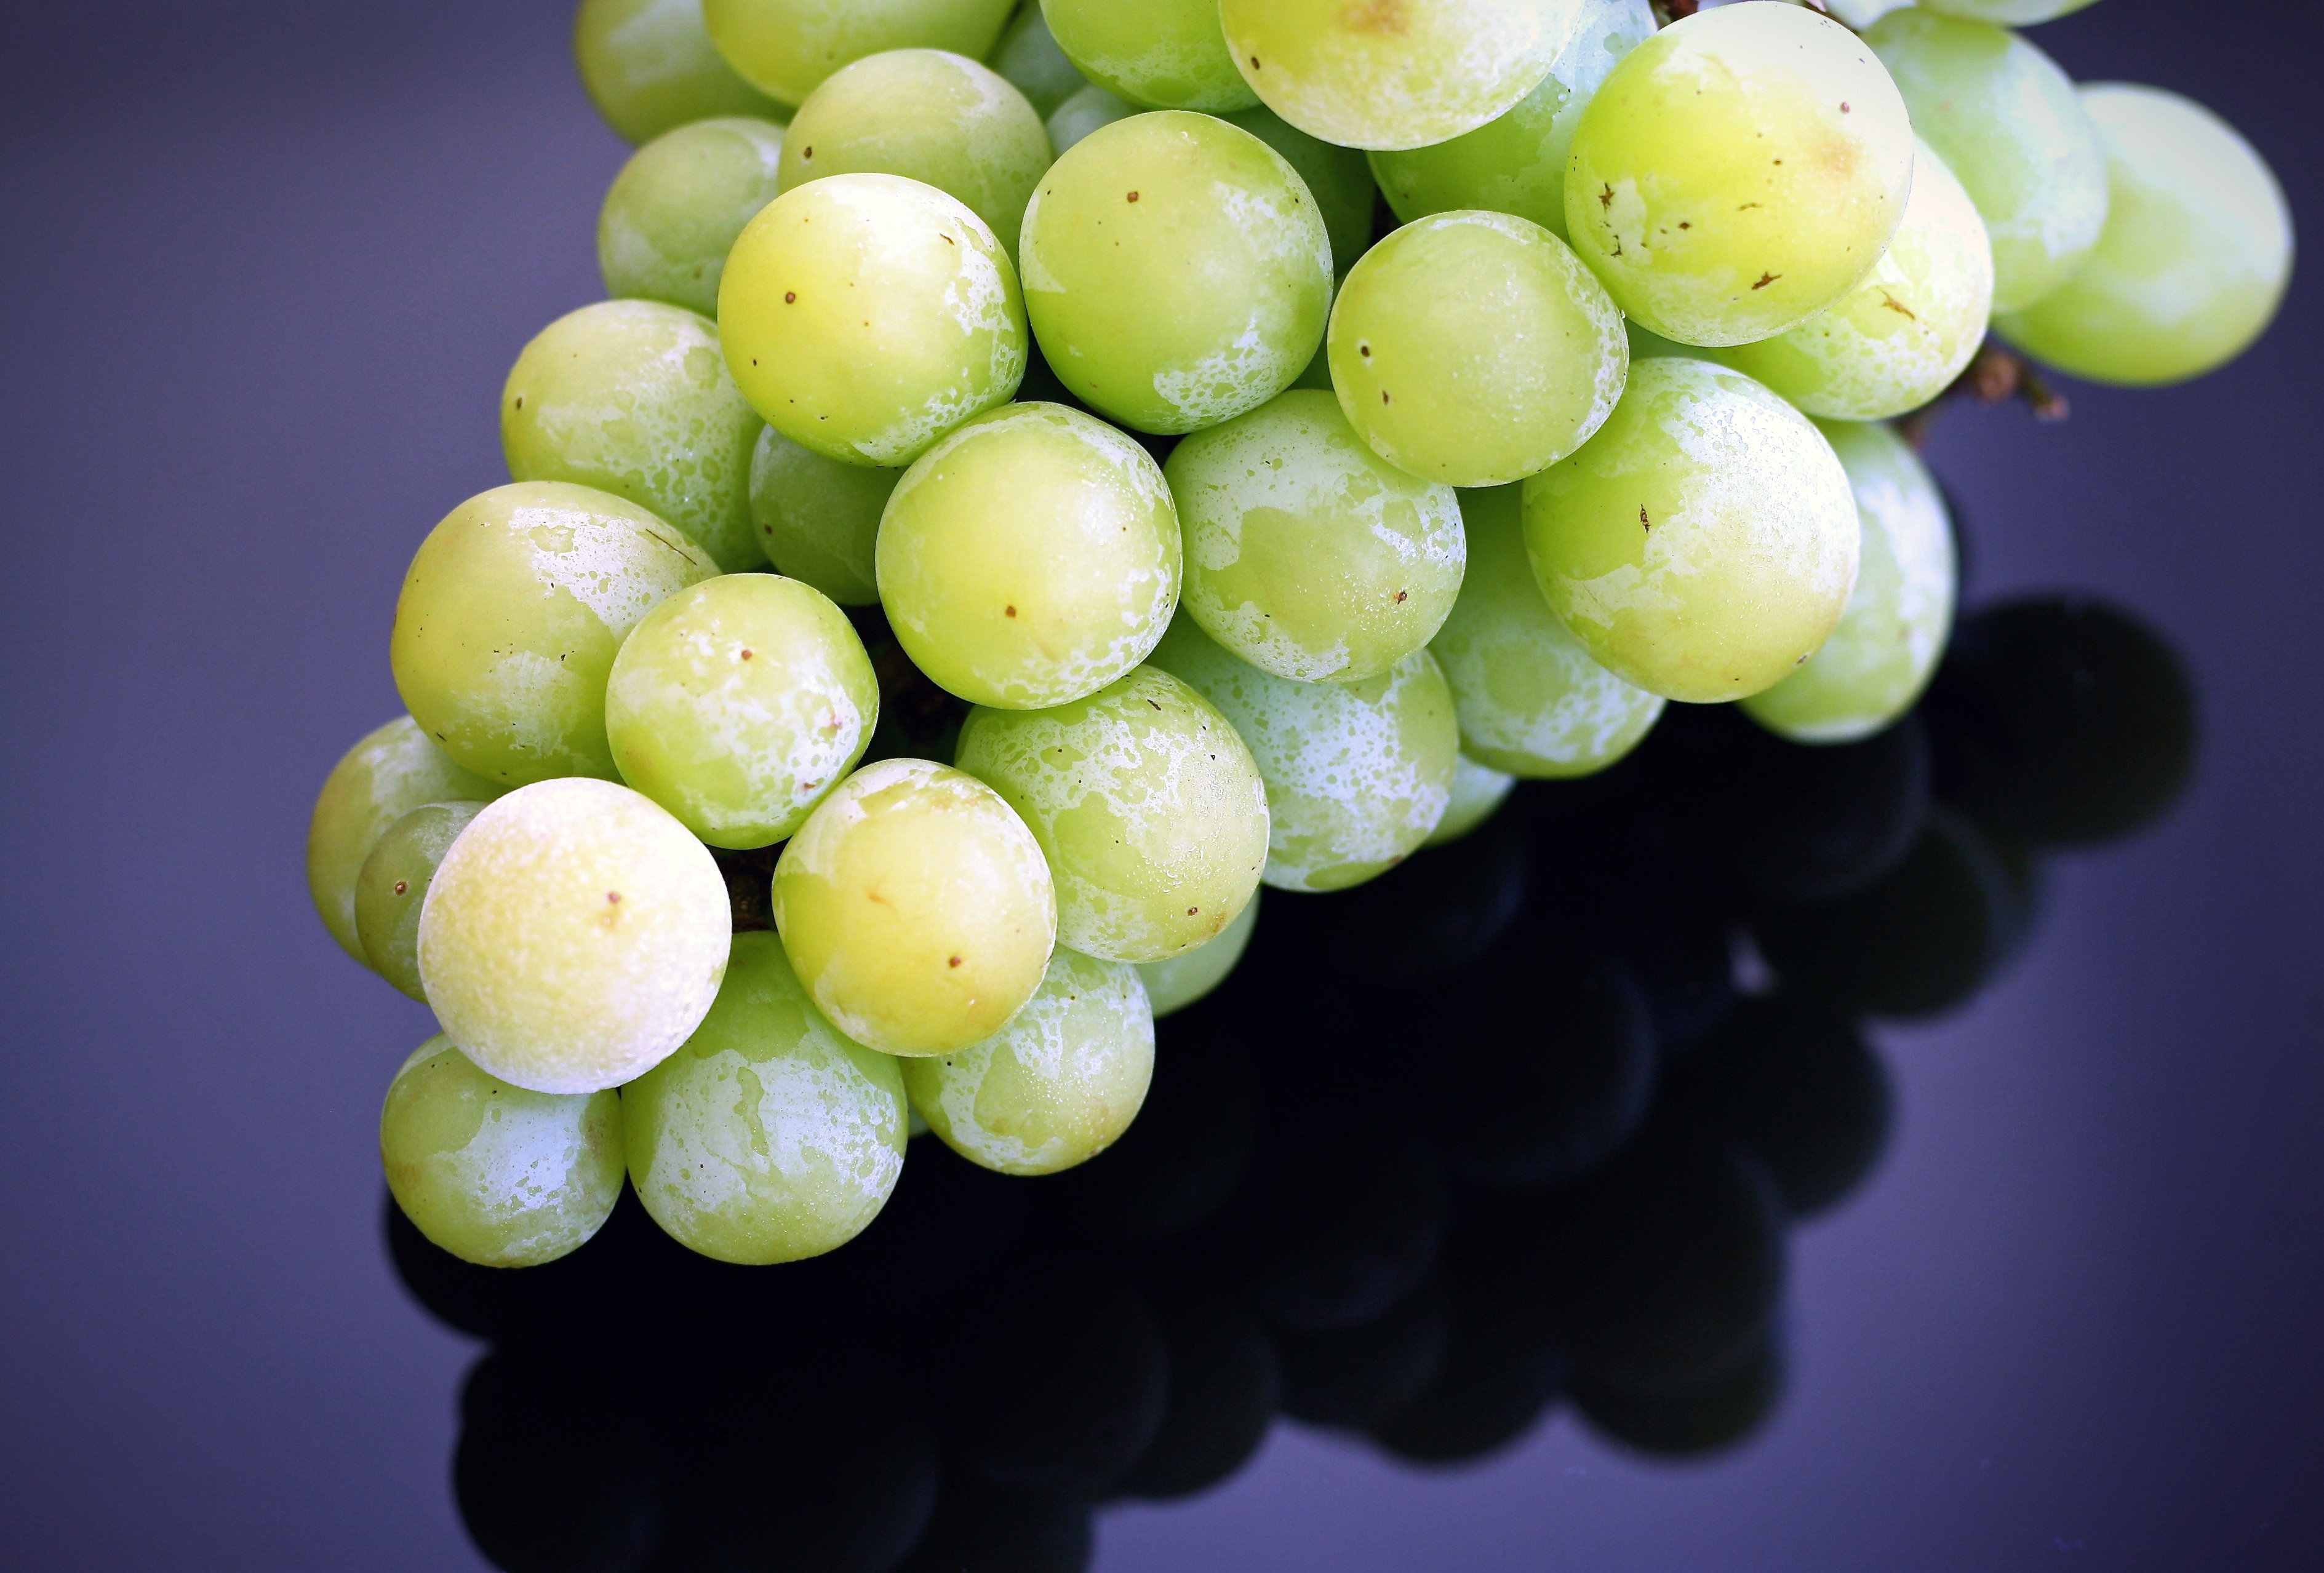 Wallpapers plant grapes fruits on the desktop